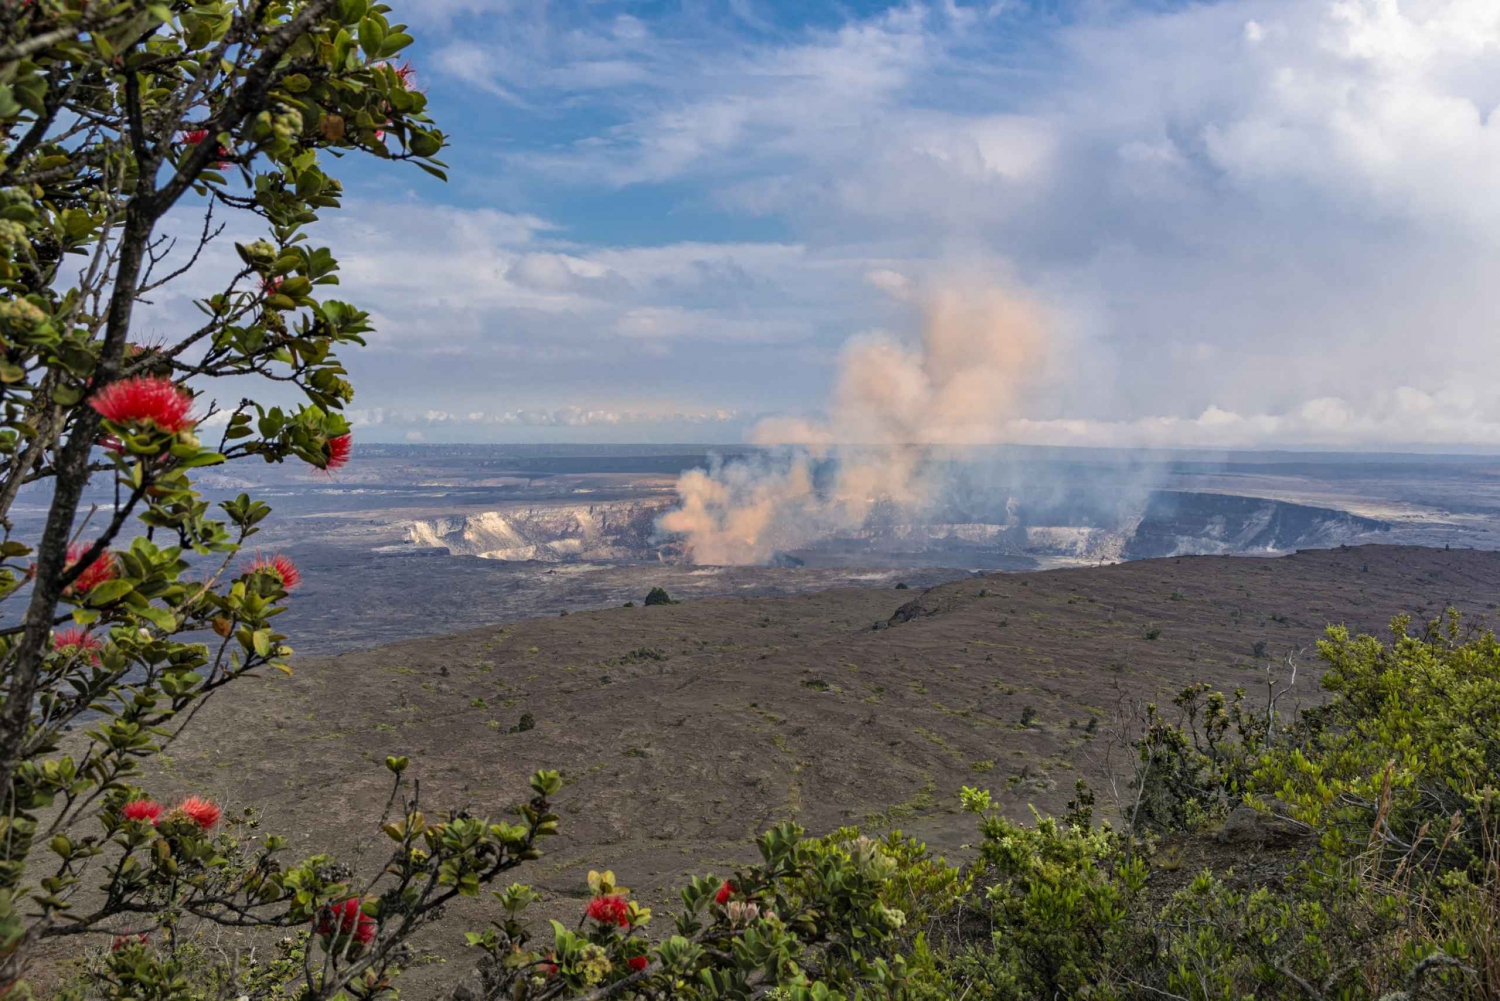 Afternoon hike in Volcanoes National Park